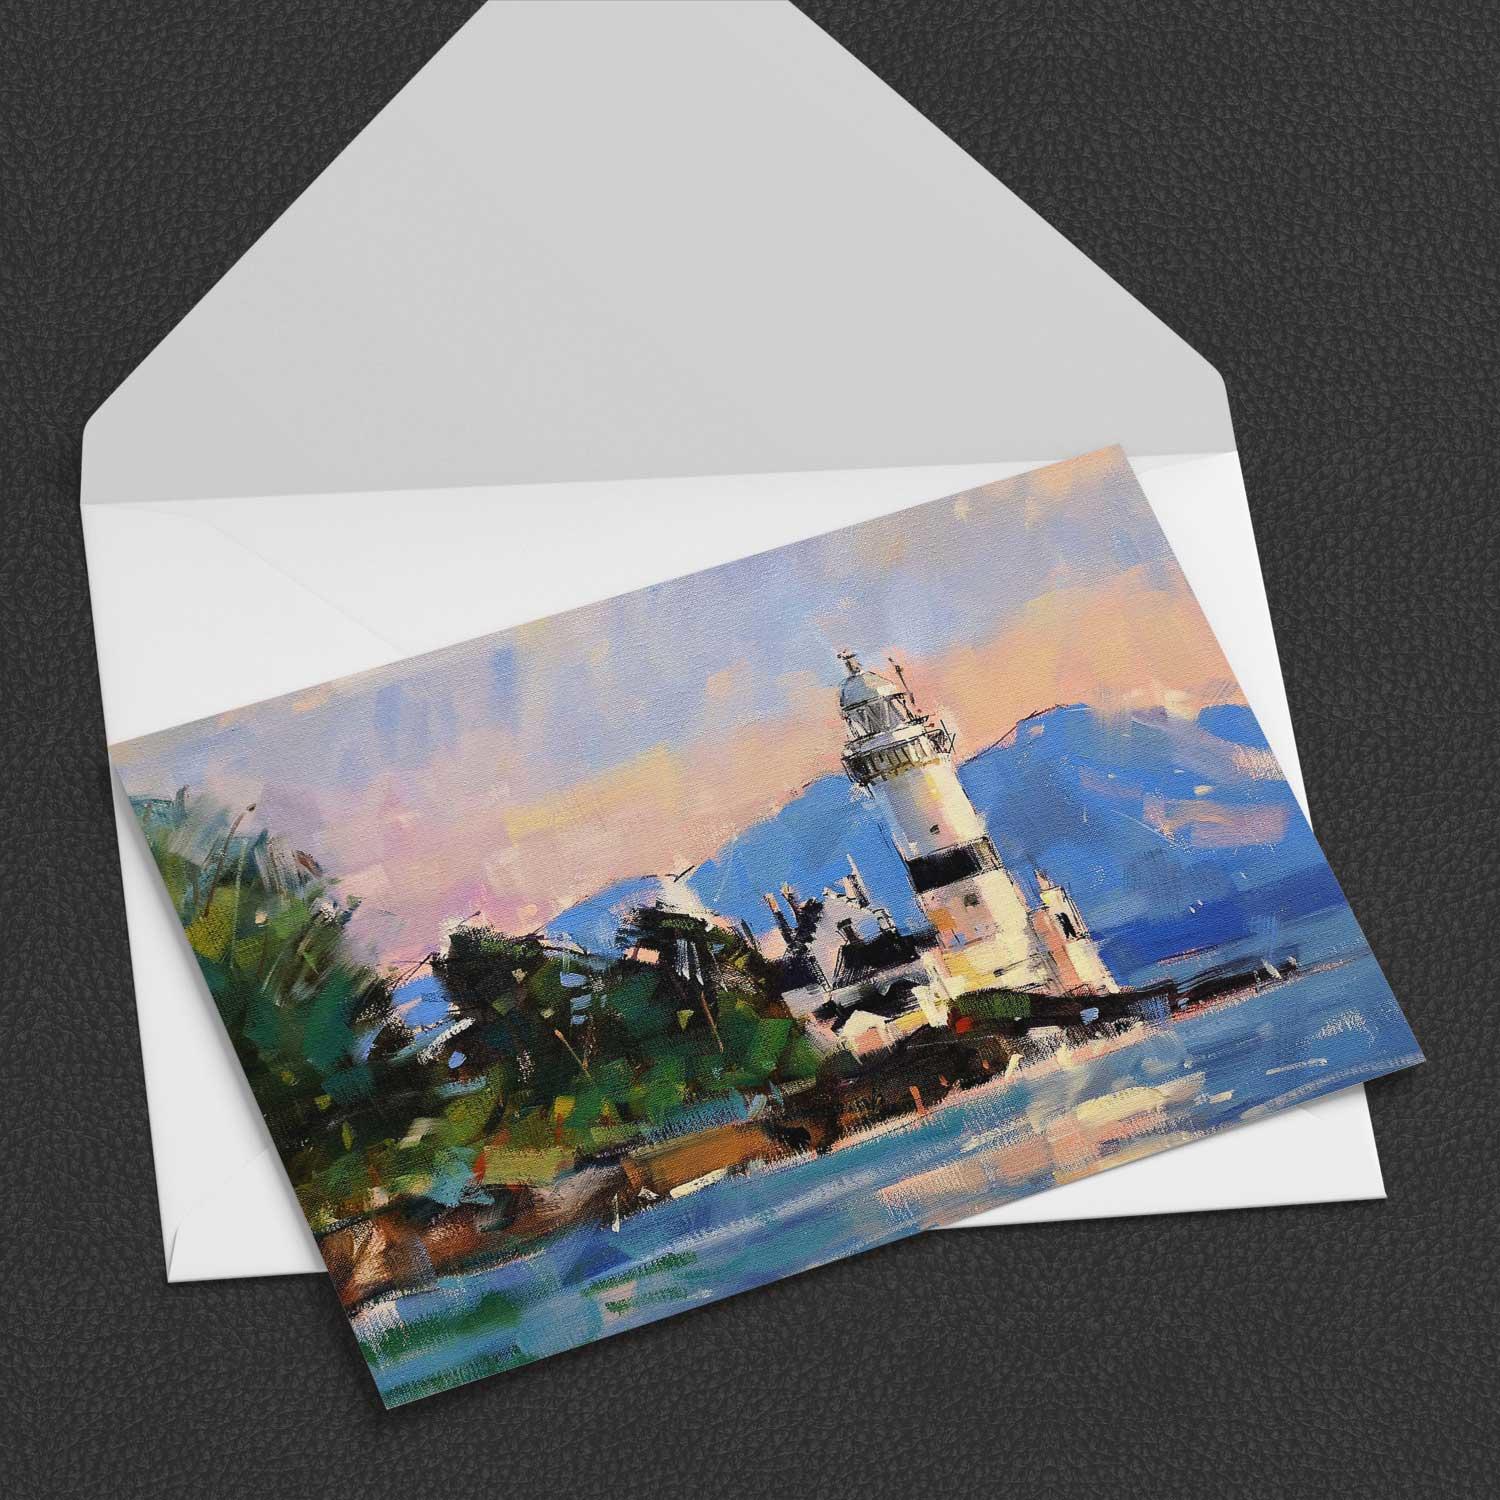 Evening, Cloch Lighthouse Greeting Card from an original painting by artist Peter Foyle